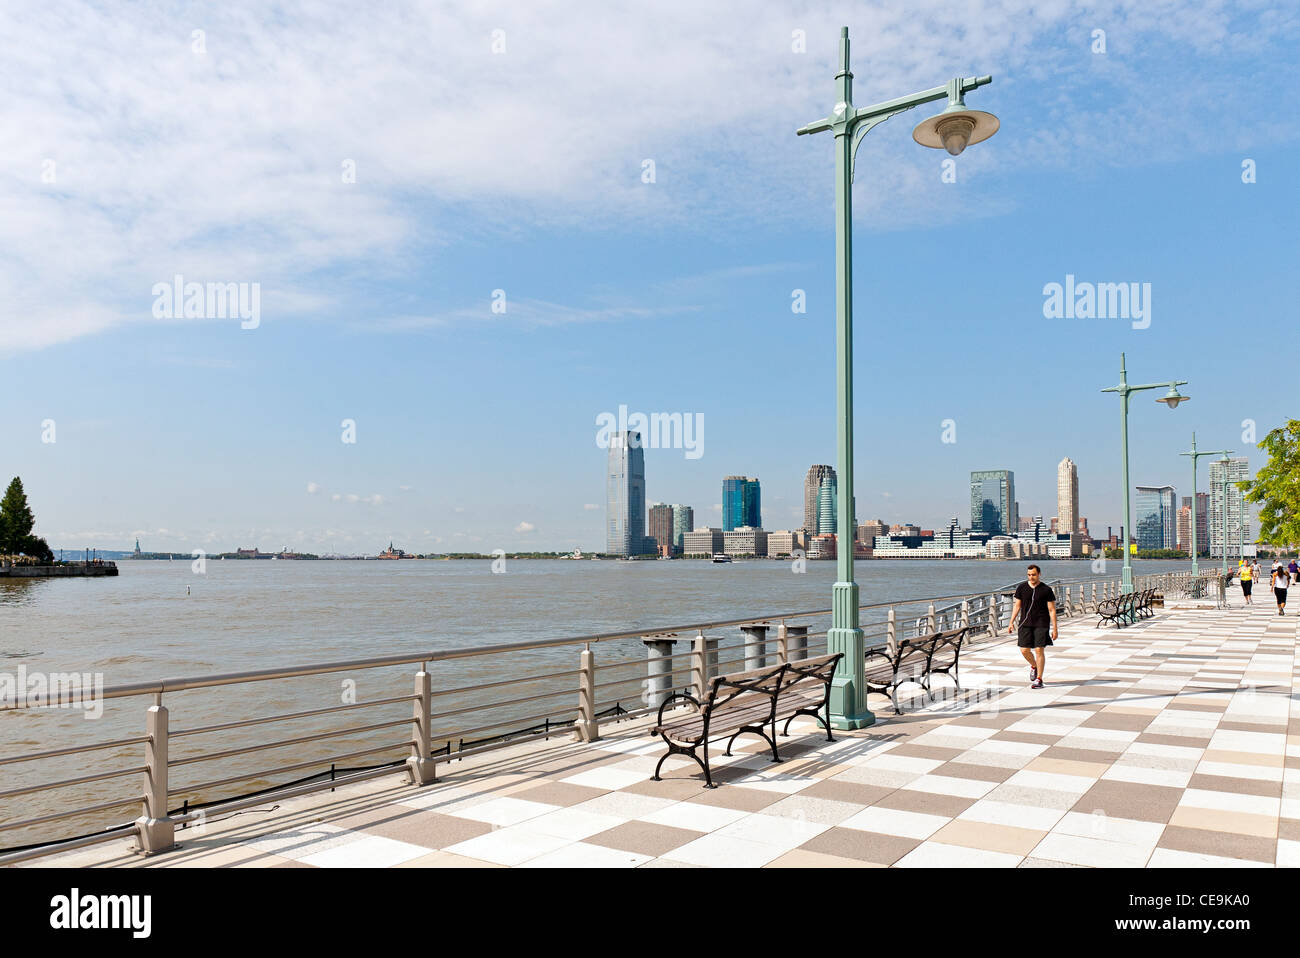 A view of the Jersey City, New Jersey skyline from across the Hudson River and the New York City Pier 25. Stock Photo